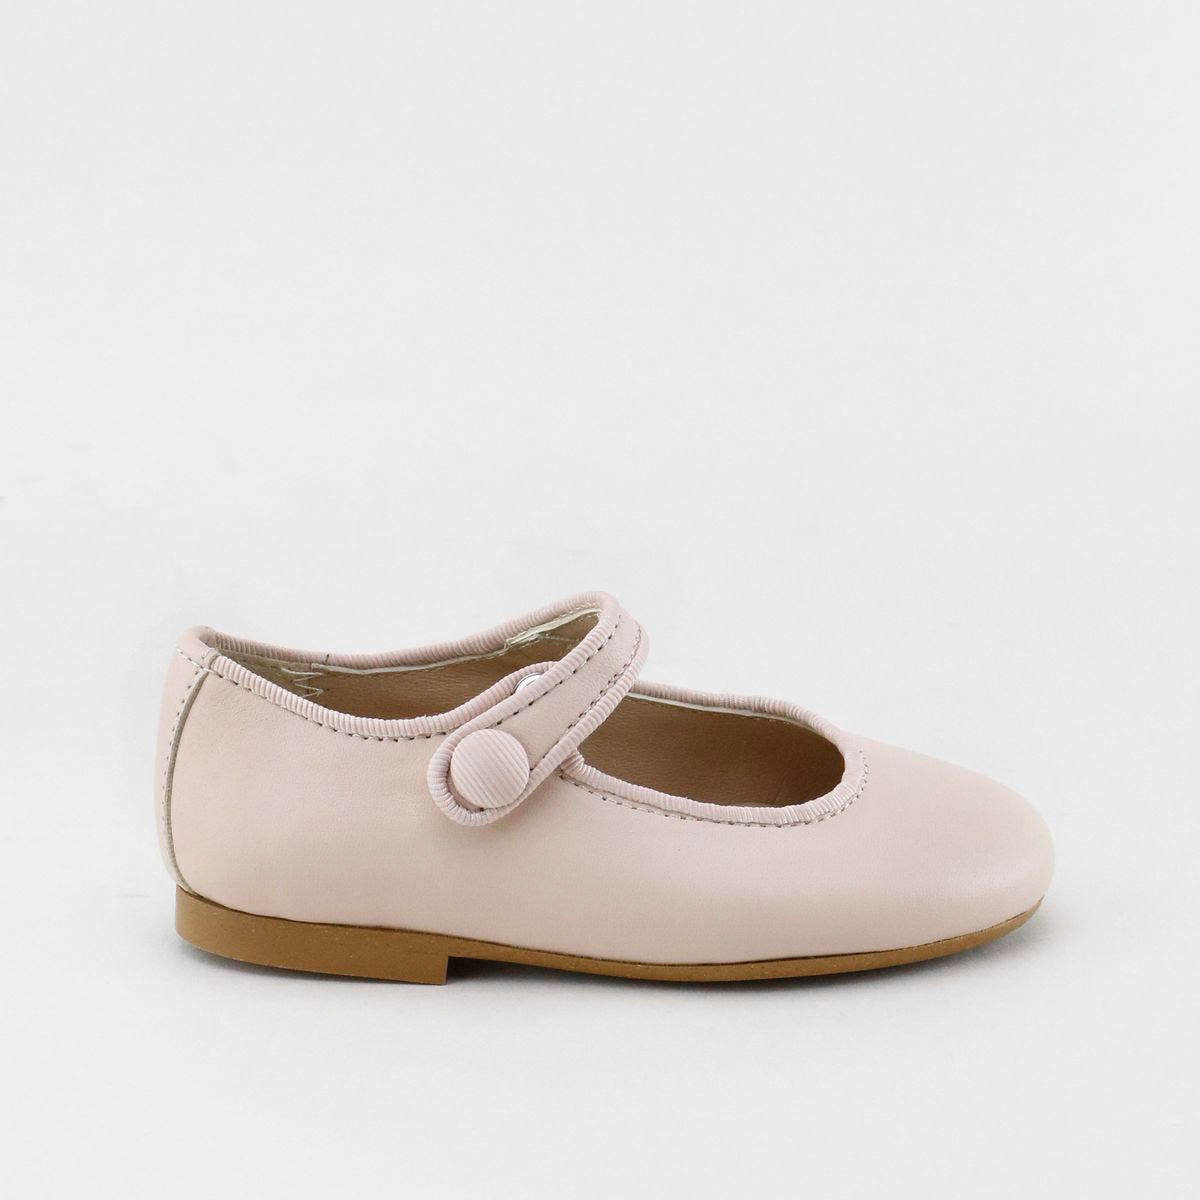 PAPANATAS PALE PINK LEATHER ROUNDED MARY JANE